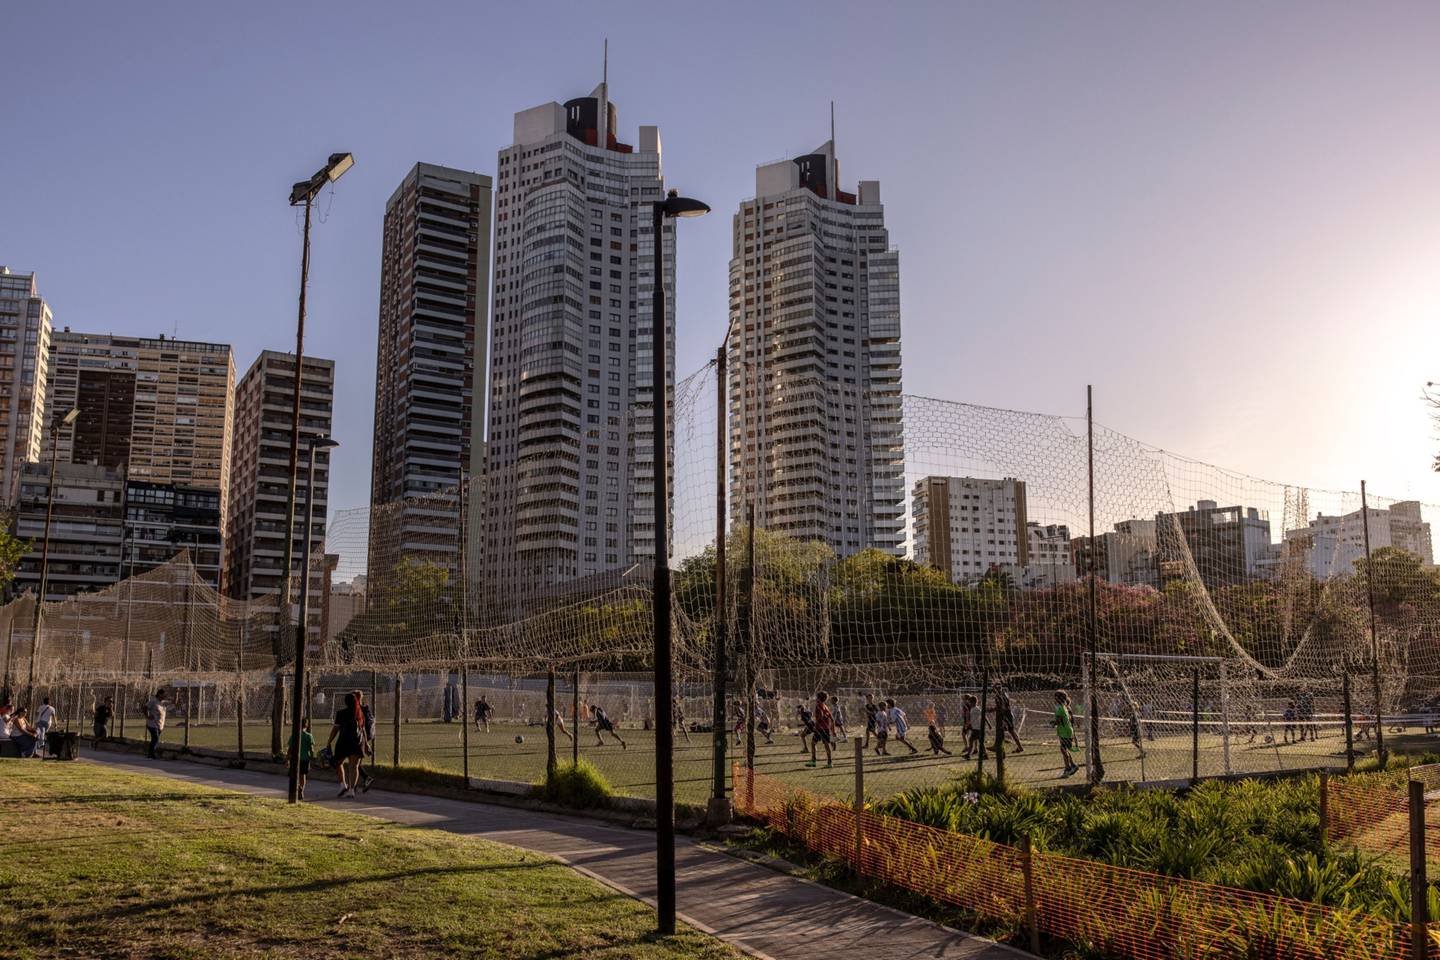 Real estate options in Buenos Aires. Photographer: Sarah Pabst/Bloomberg